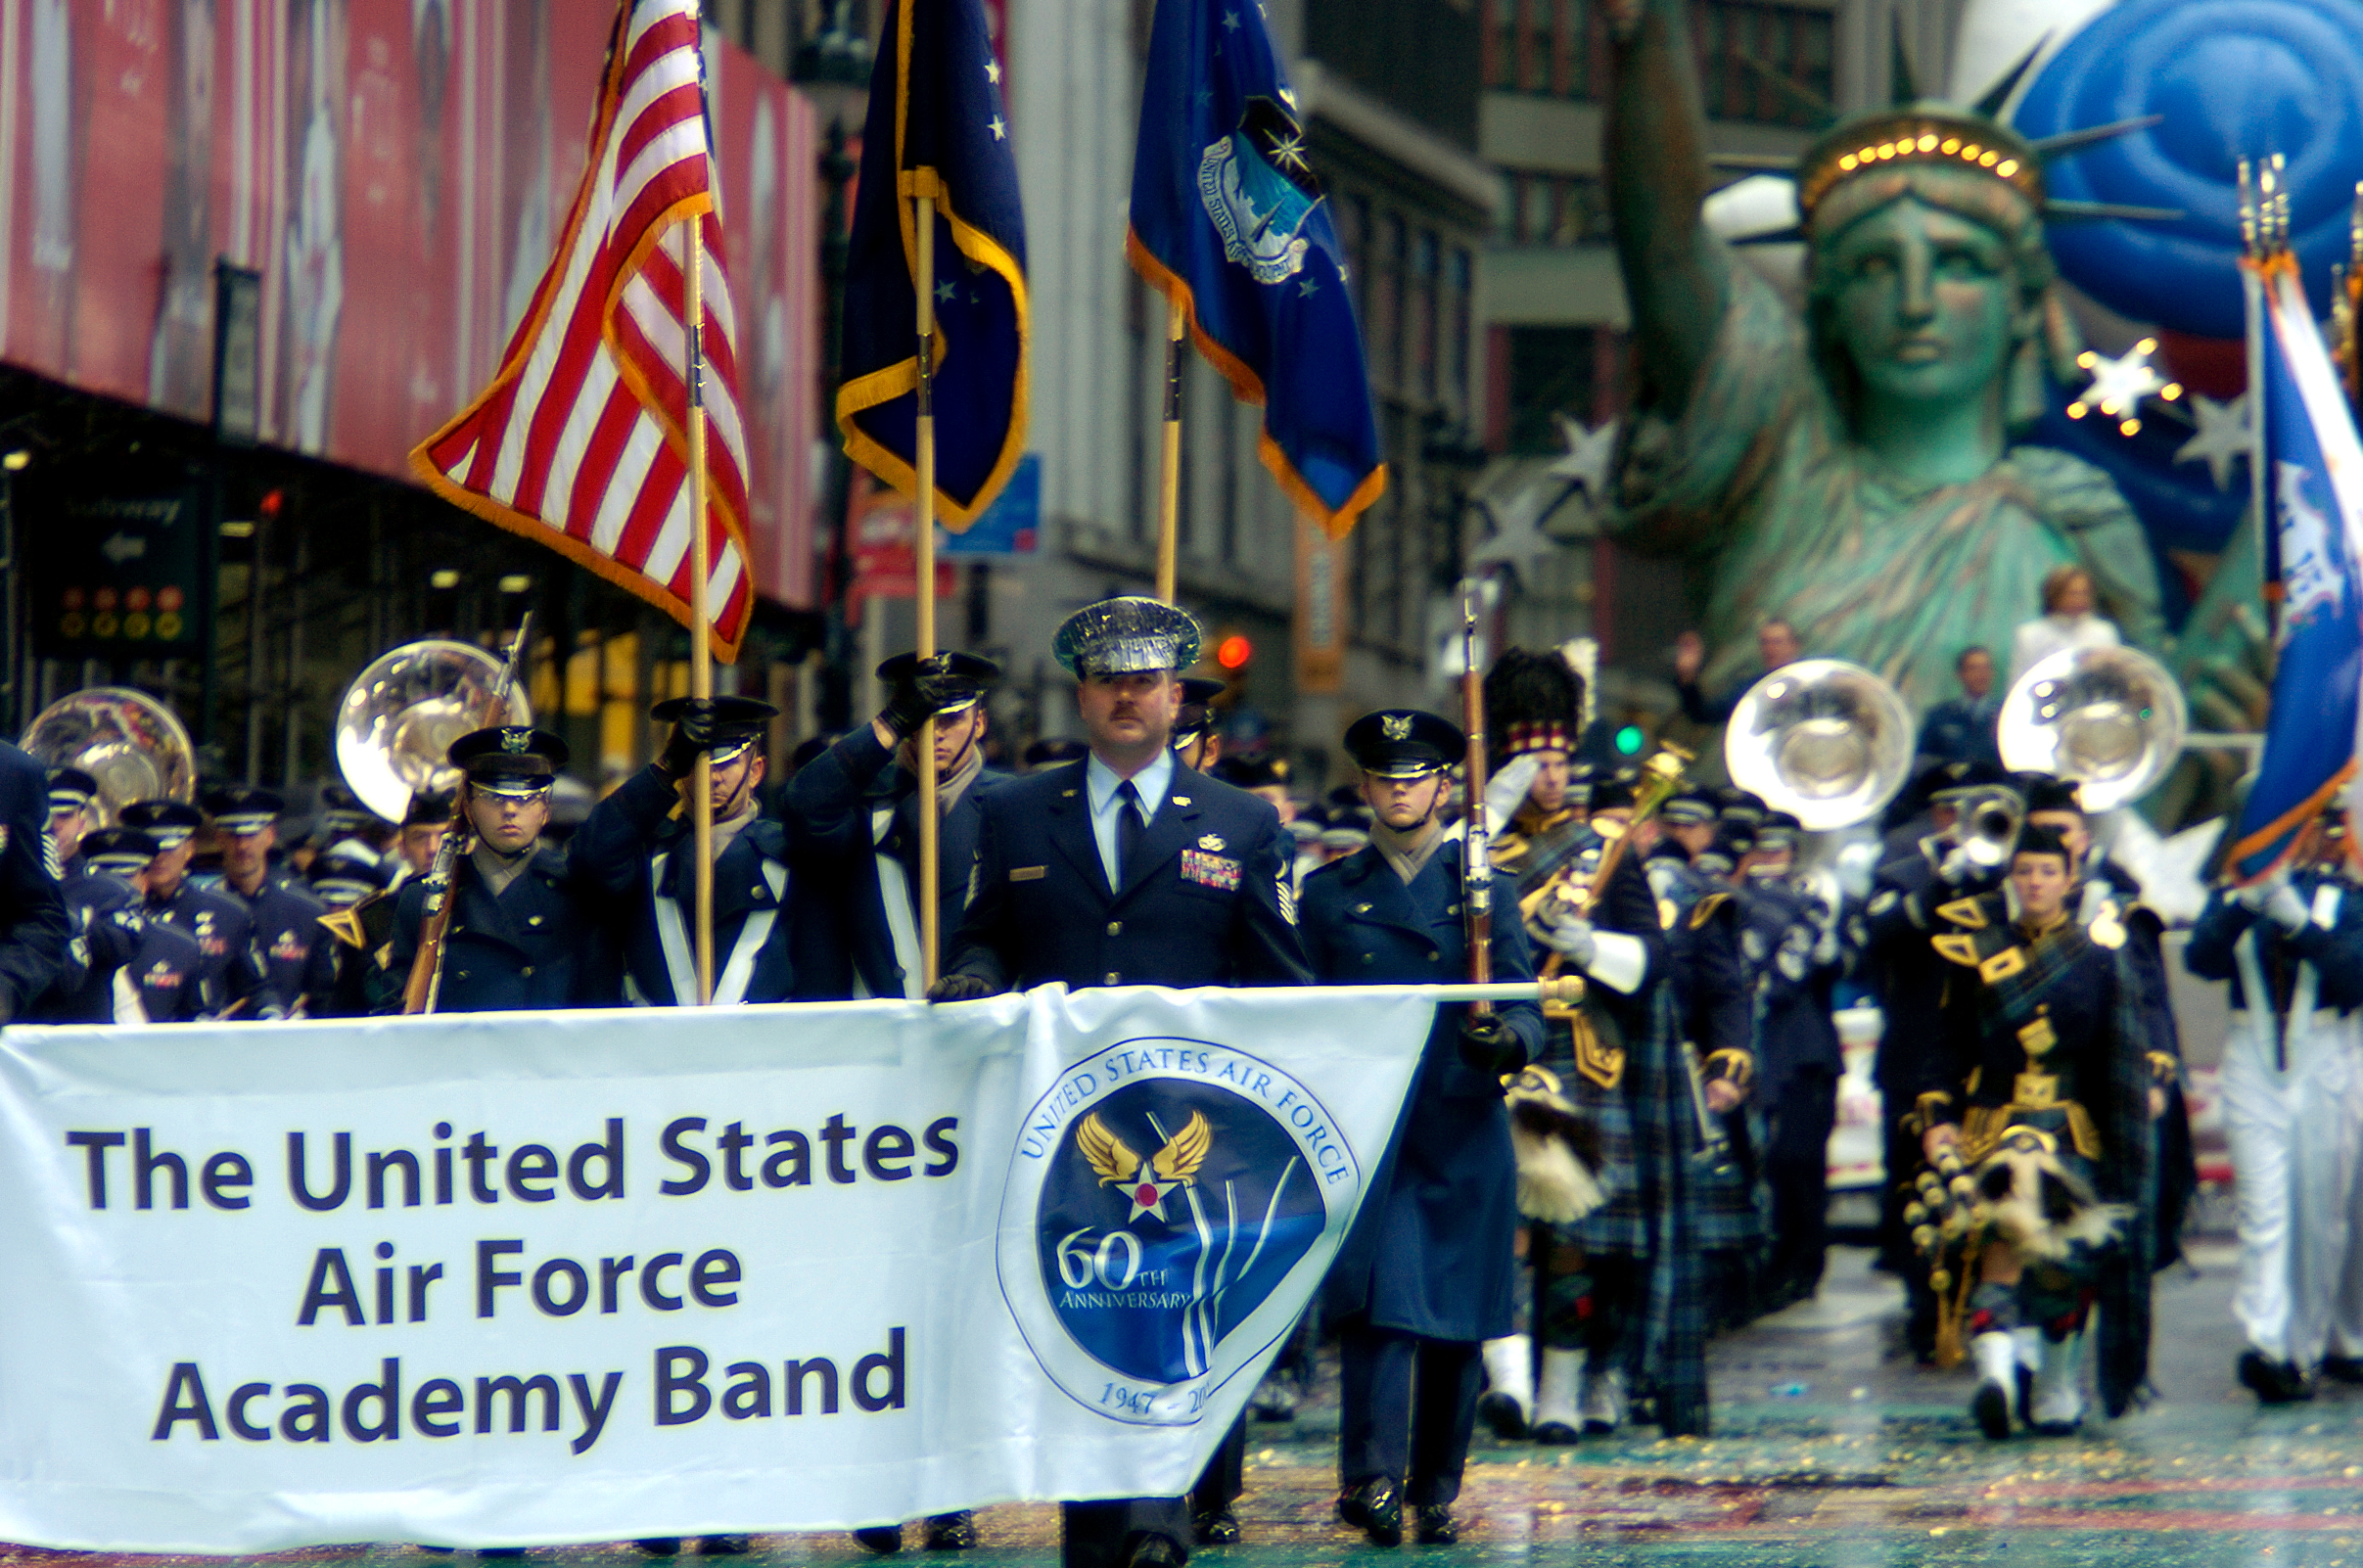 Academy band marches in Macy's parade 